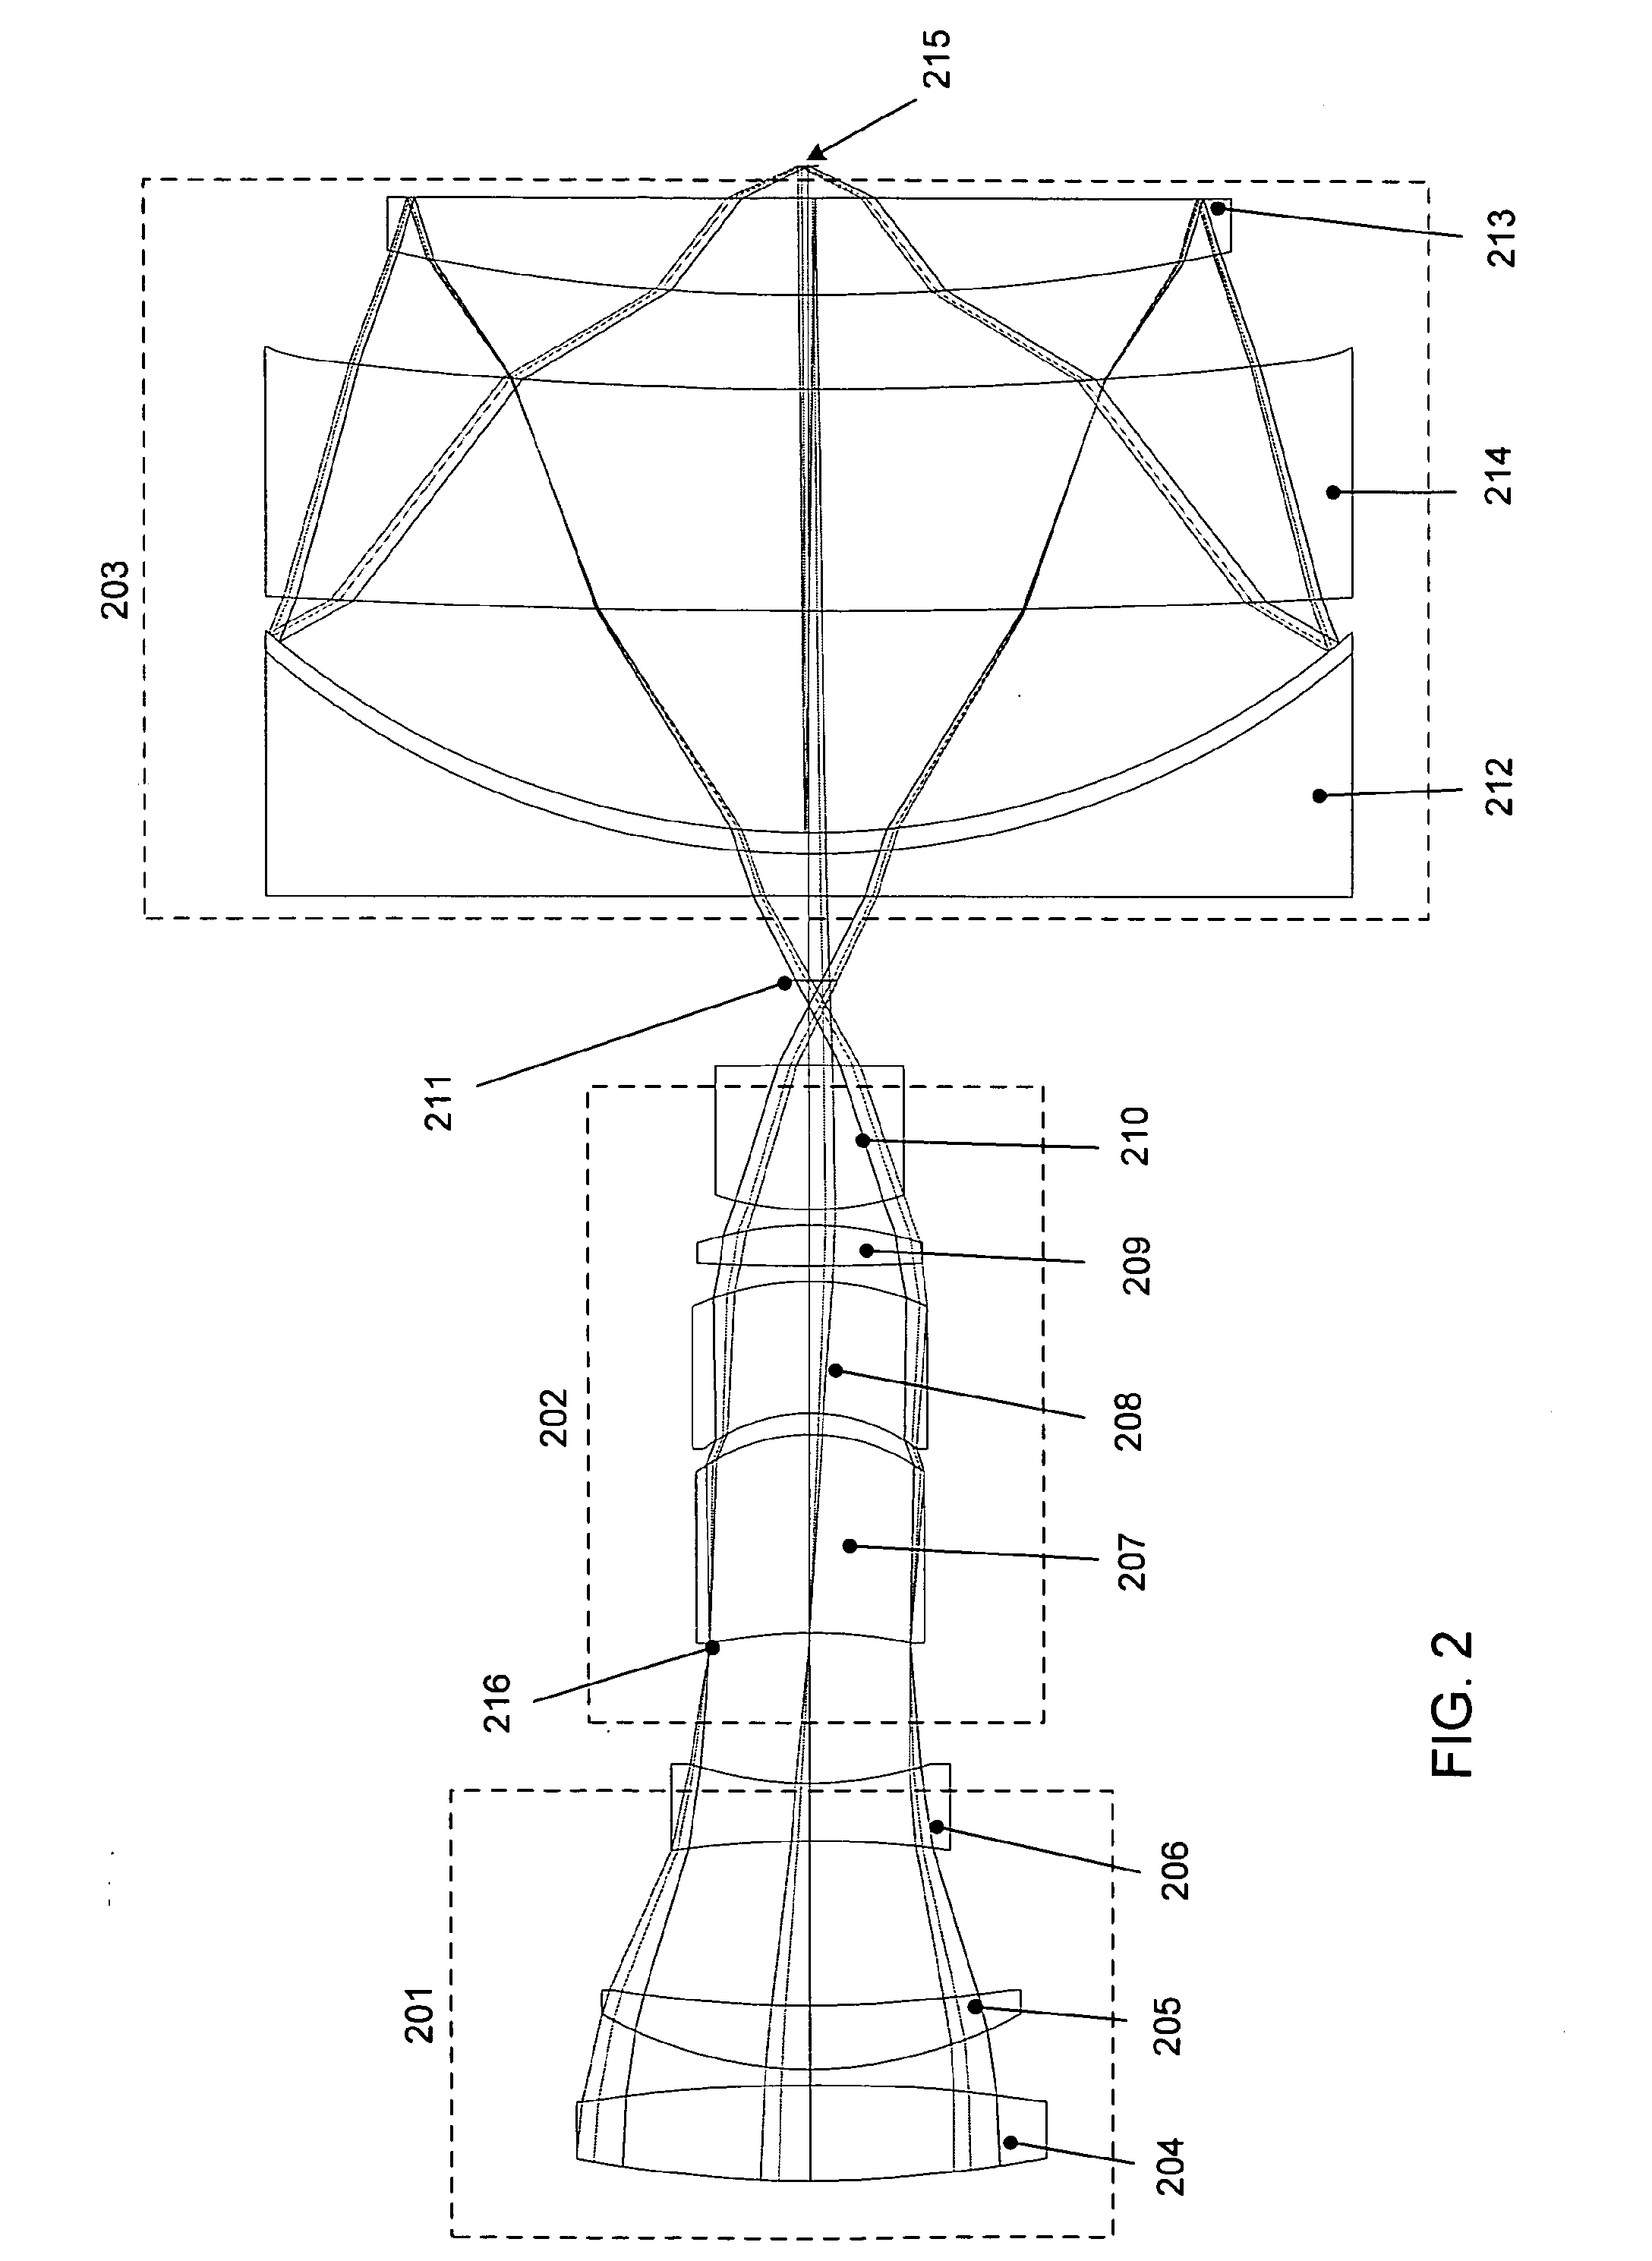 External beam delivery system using catadioptric objective with aspheric surfaces